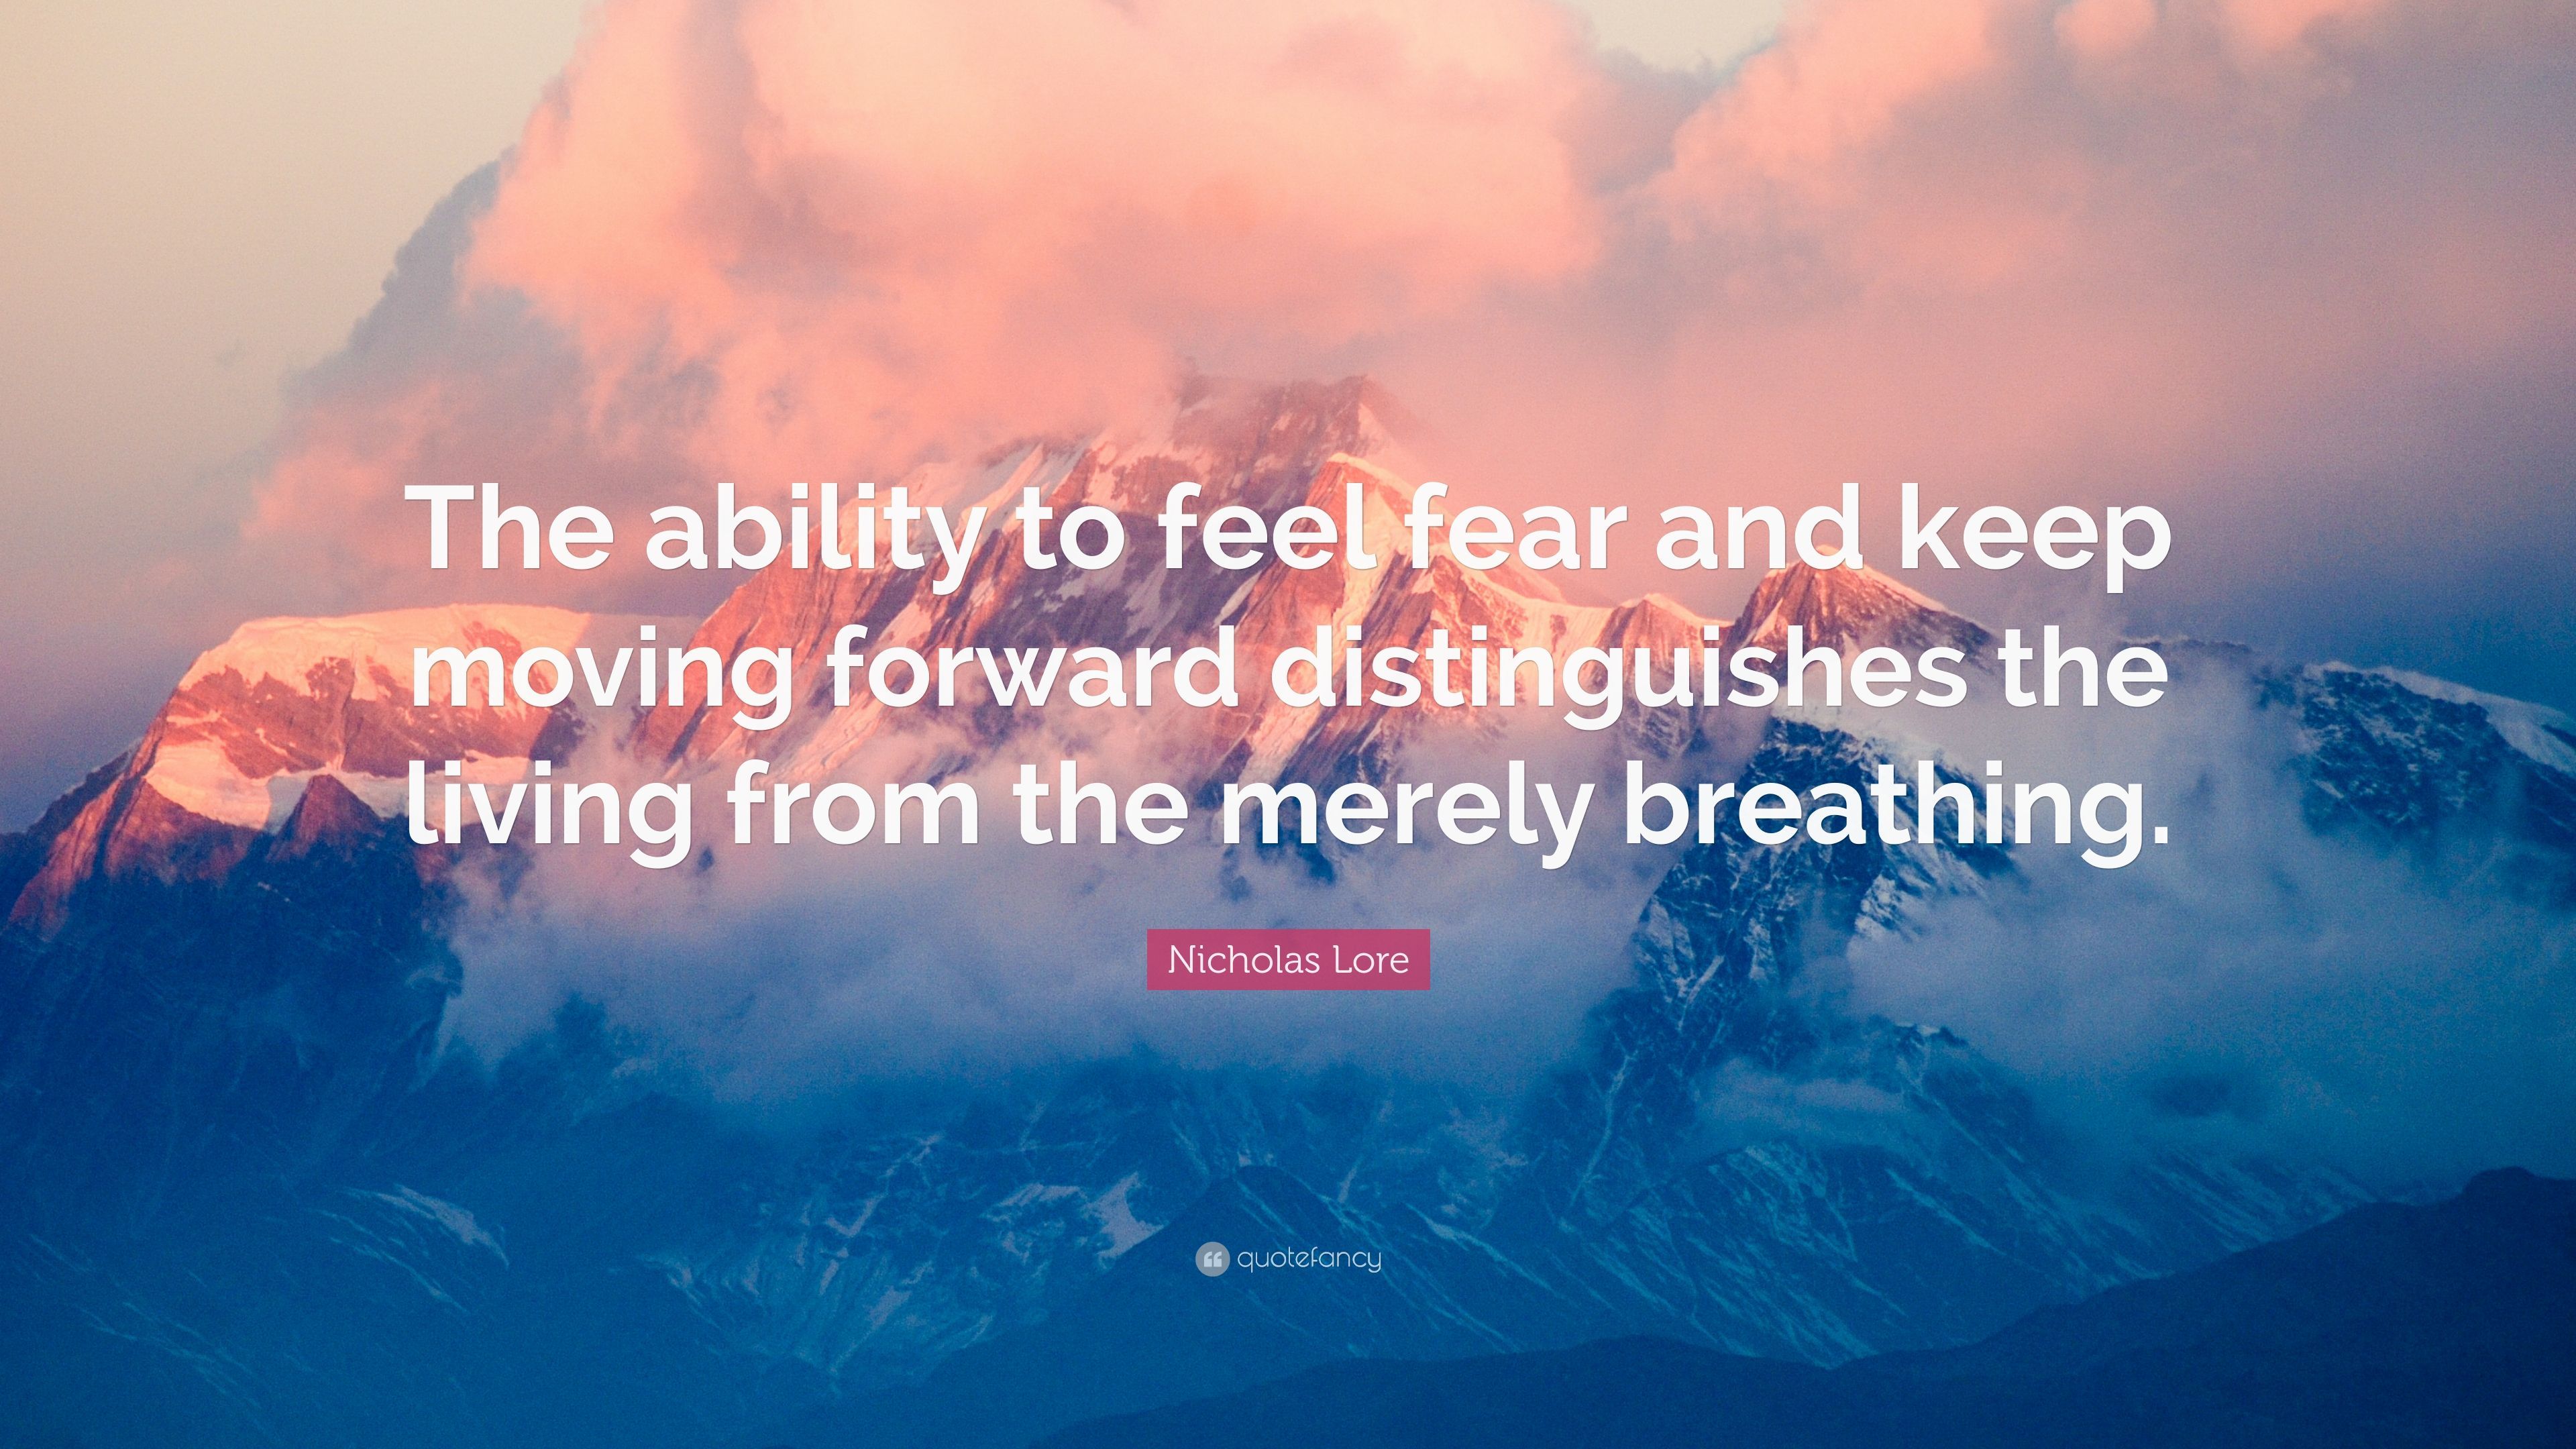 Nicholas Lore Quote: “The ability to feel fear and keep moving forward distinguishes the living from the merely breathing.” (7 wallpaper)